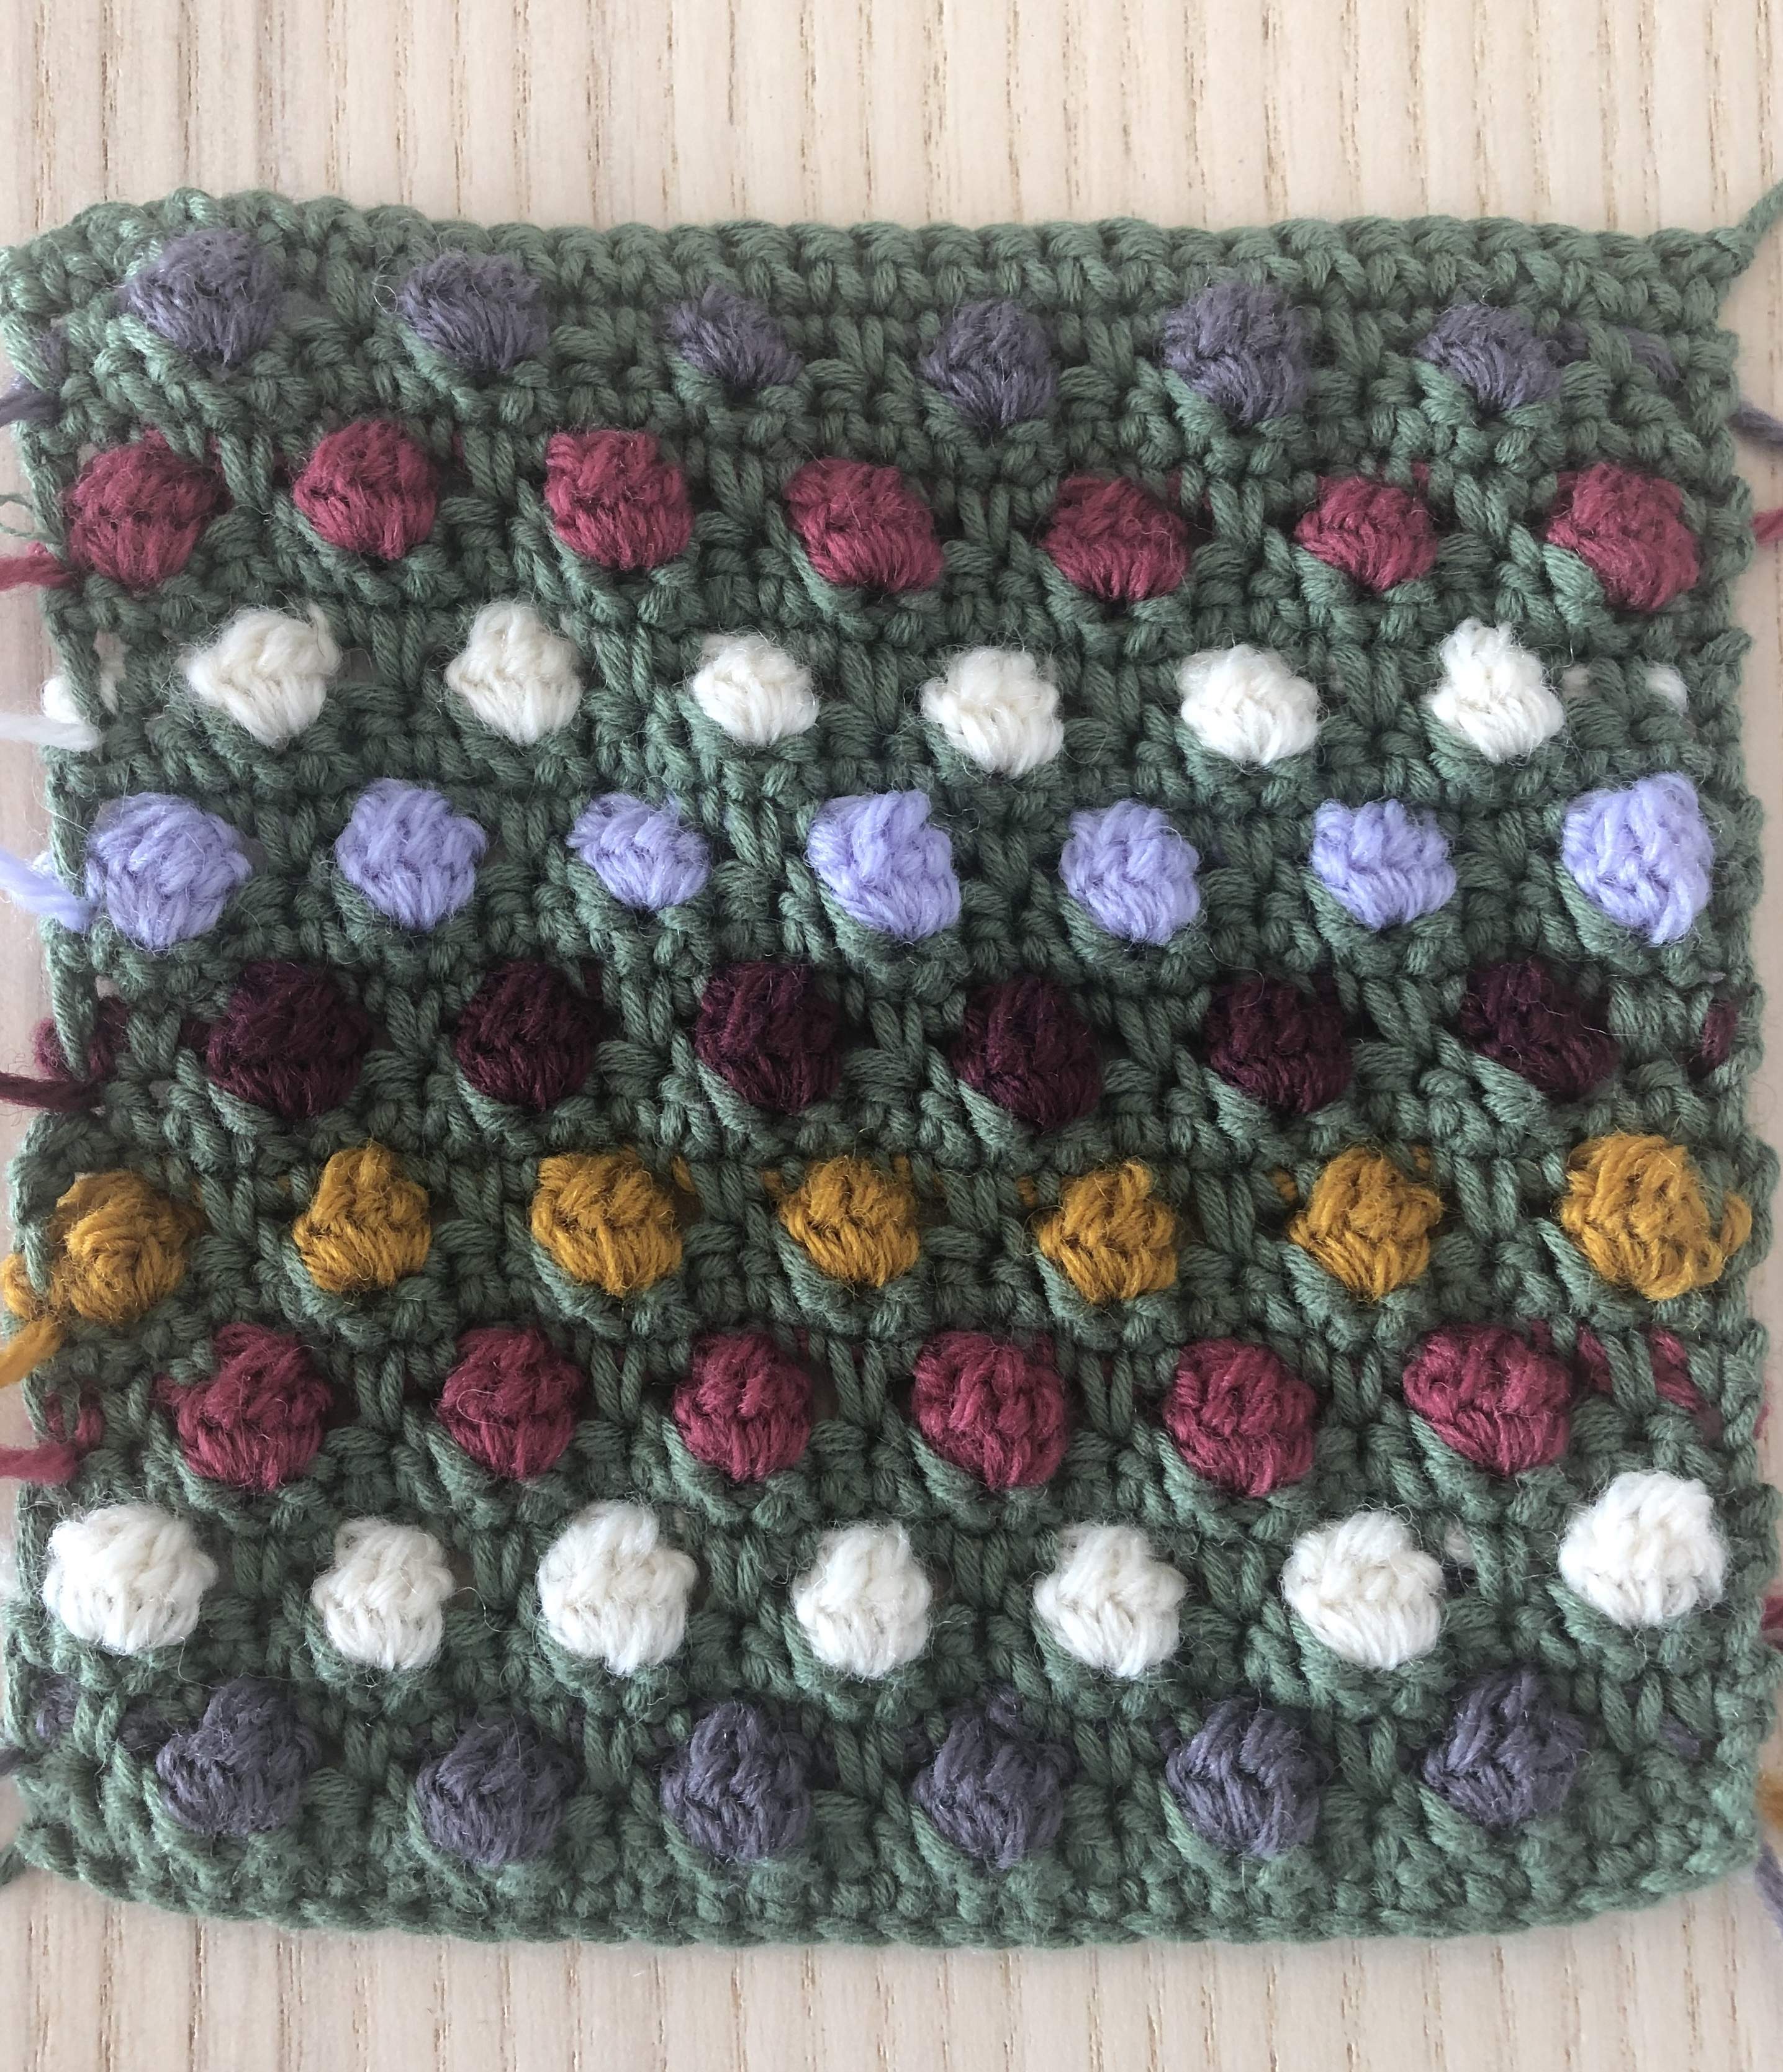 More of your stitchalong squares